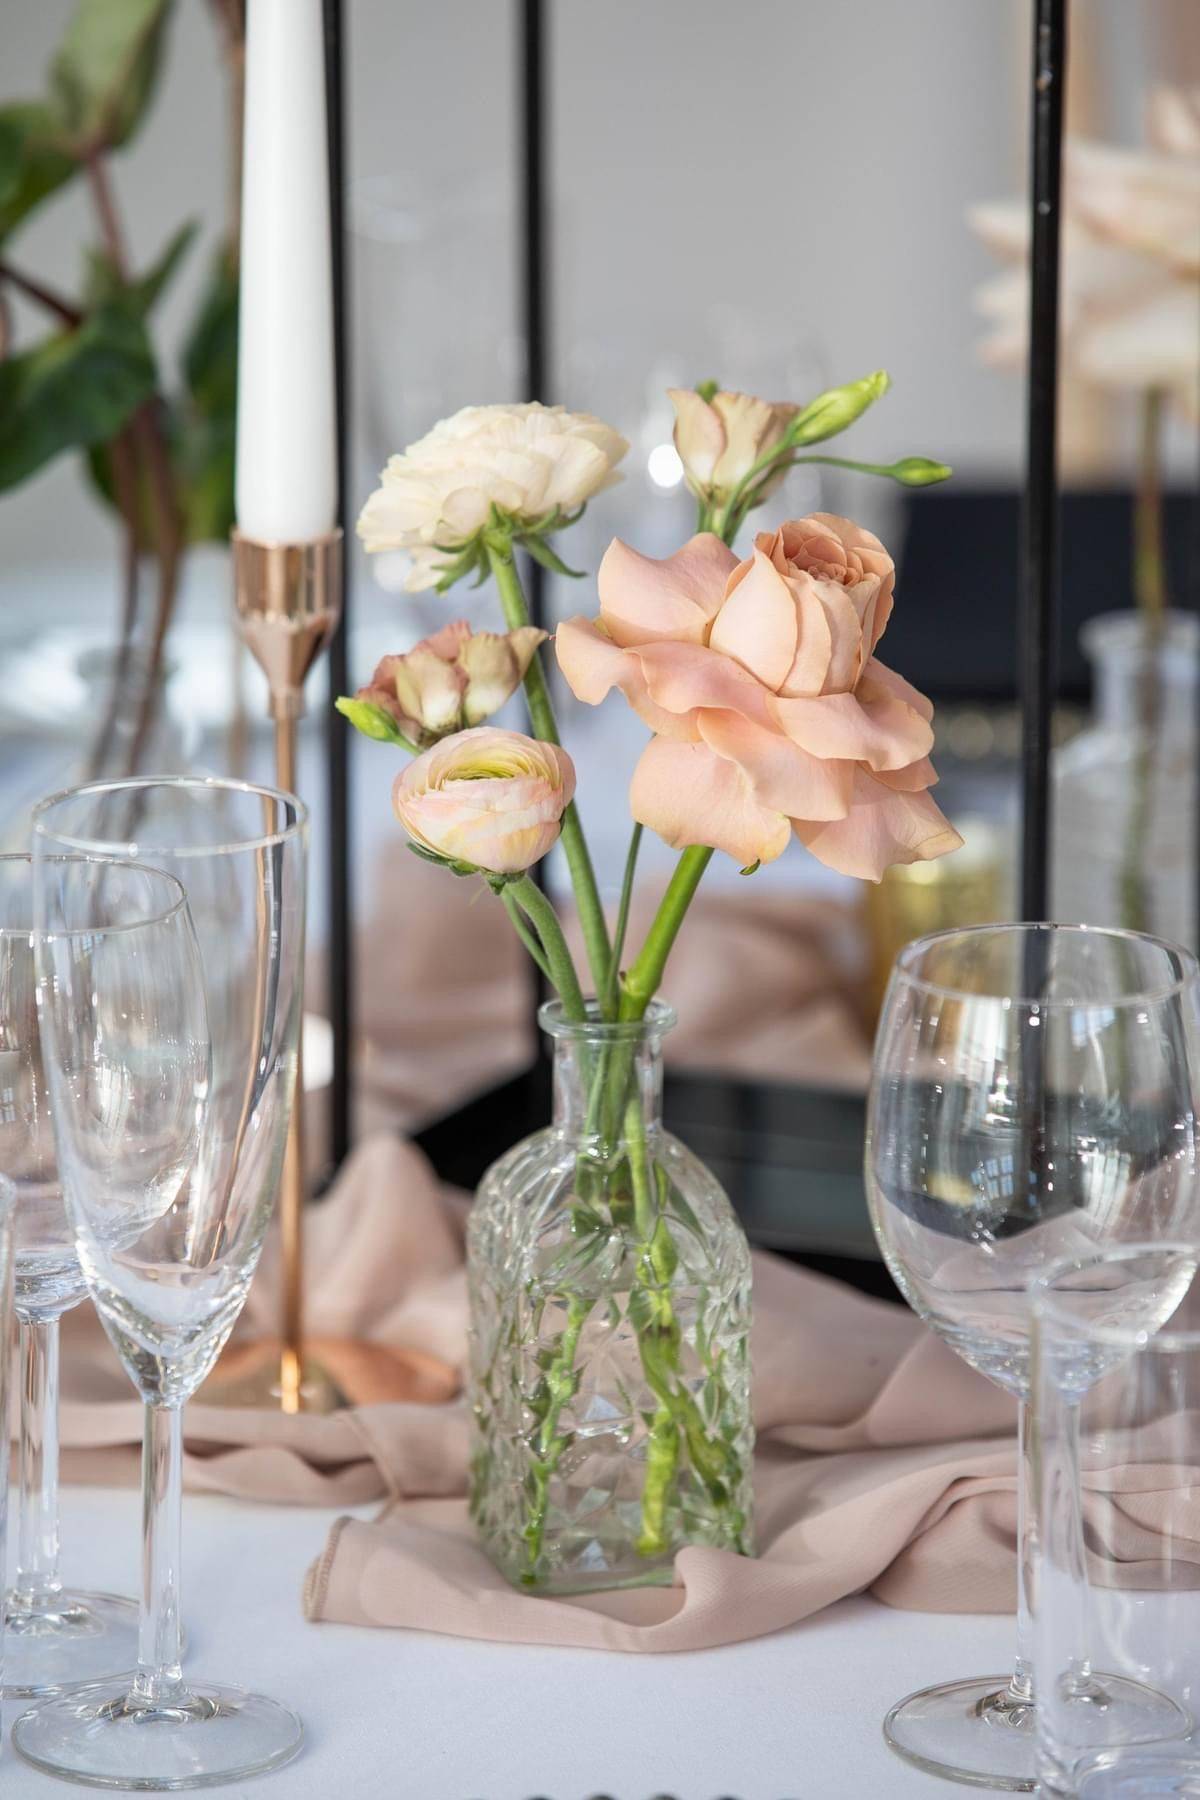 a vase of flowers on a table with wine glasses.